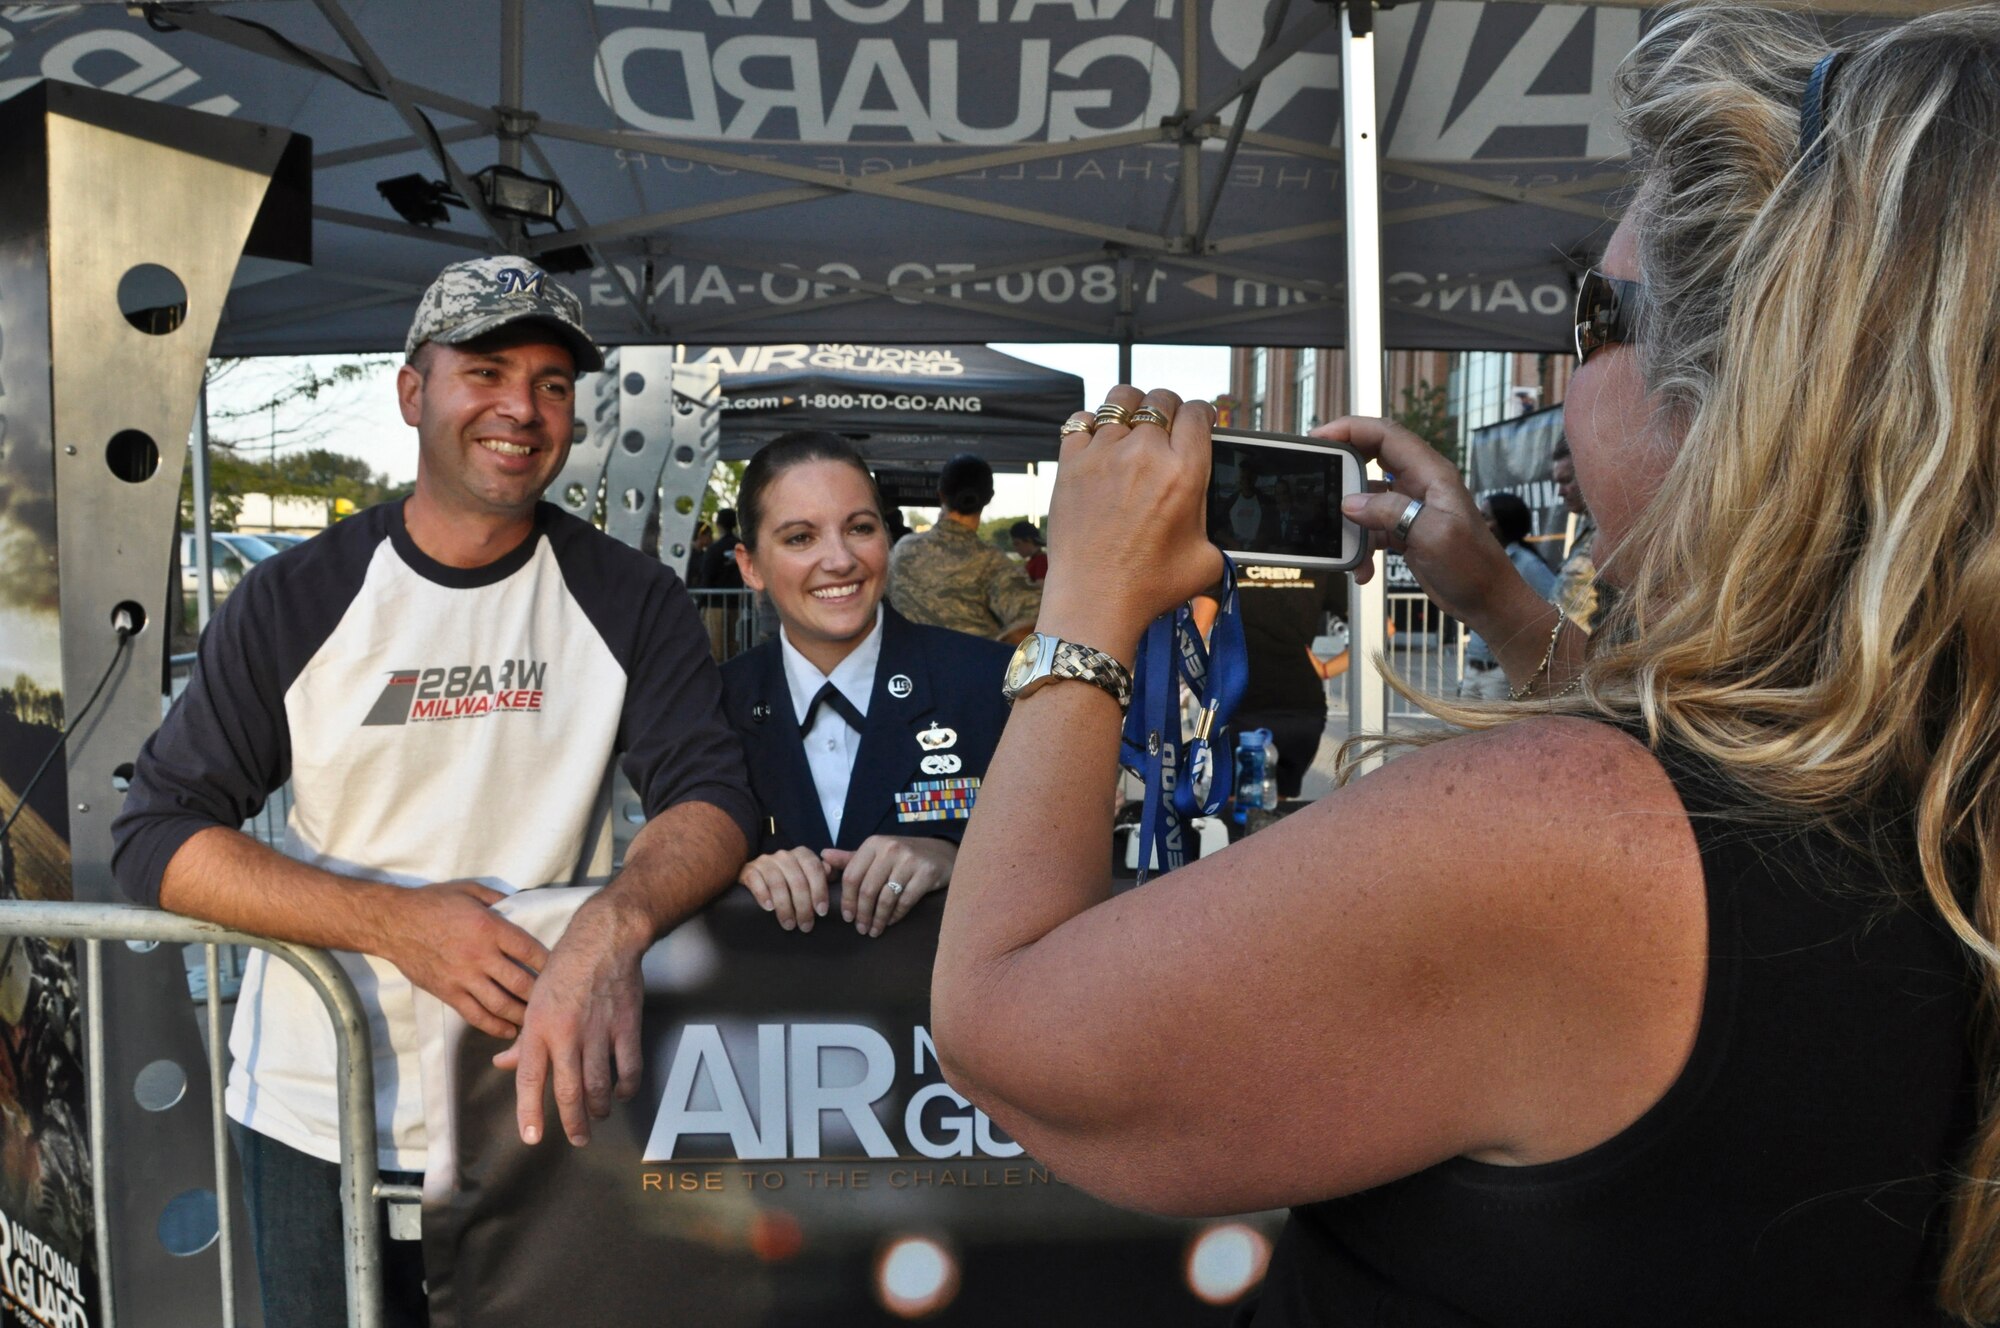 Wisconsin Air National Guardsman Staff Sgt. Leah Rogers and her husband, Chris, pose for a photograph at the Air National Guard’s recruiting booth at Miller Park in Milwaukee Wed., Sept. 12, 2012. 
Chris Rogers also serves with the 128th as Quality Assurance Inspector in the Maintenance Squadron and holds the rank of technical sergeant. 
Rogers was at Miller Park to throw out the ceremonial first pitch before the Brewers’ game against the Atlanta Braves. (Air National Guard Photo by Staff Sgt. Christopher Wenzel / Released)
